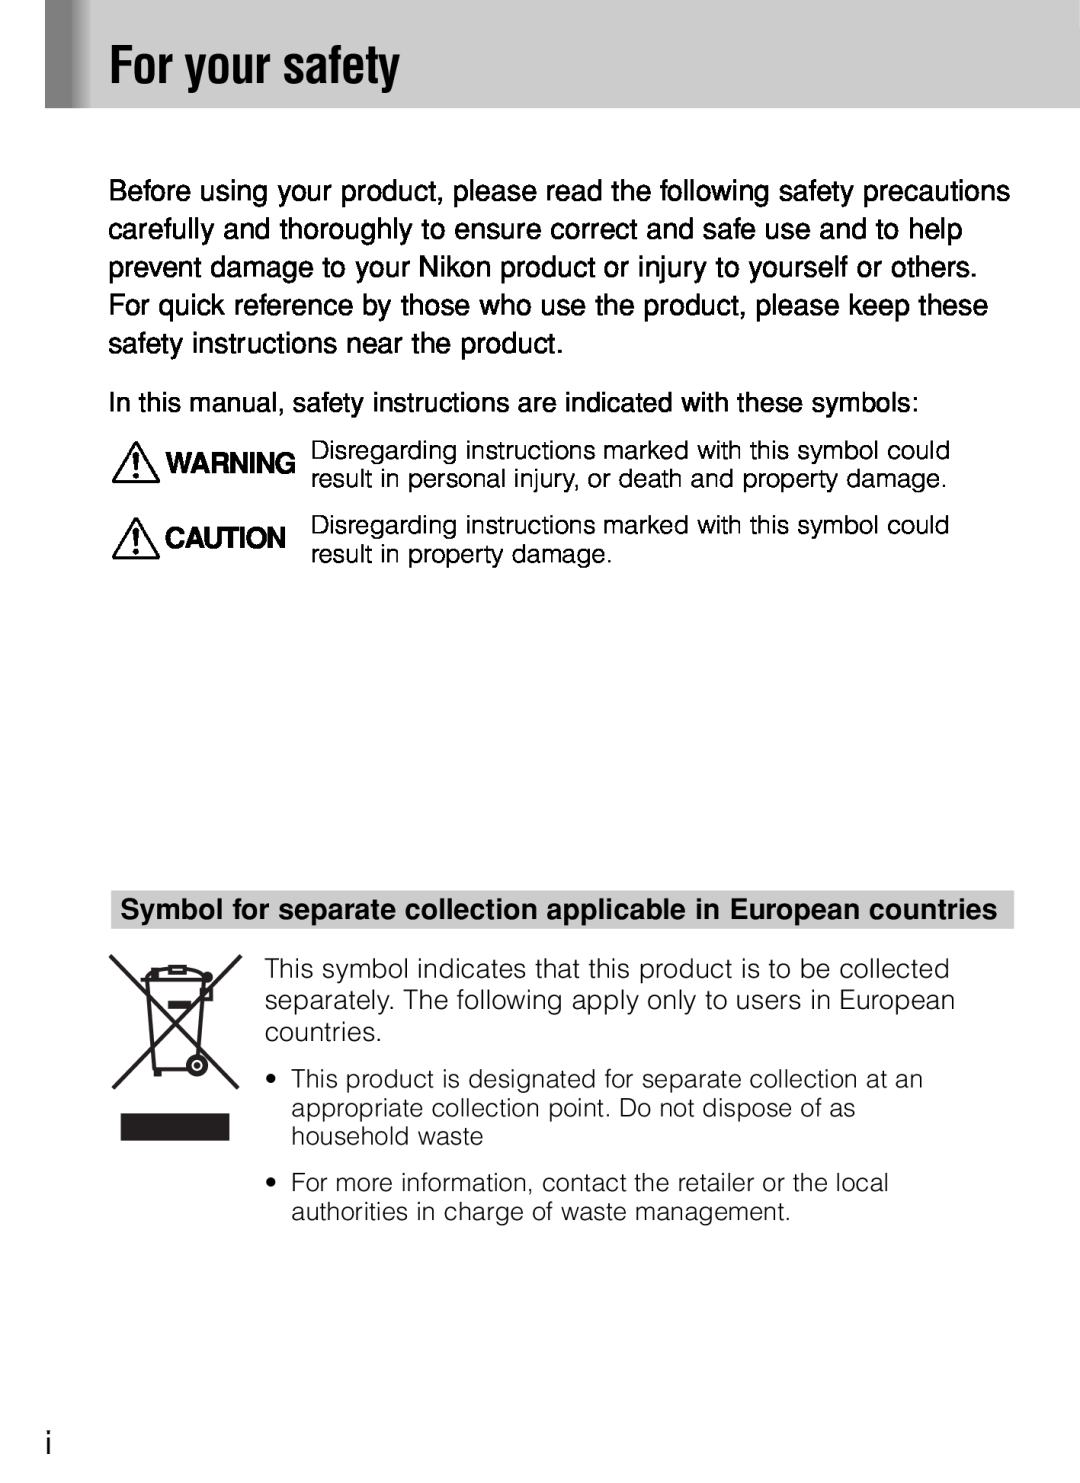 Nikon SB-800 instruction manual For your safety, Symbol for separate collection applicable in European countries 